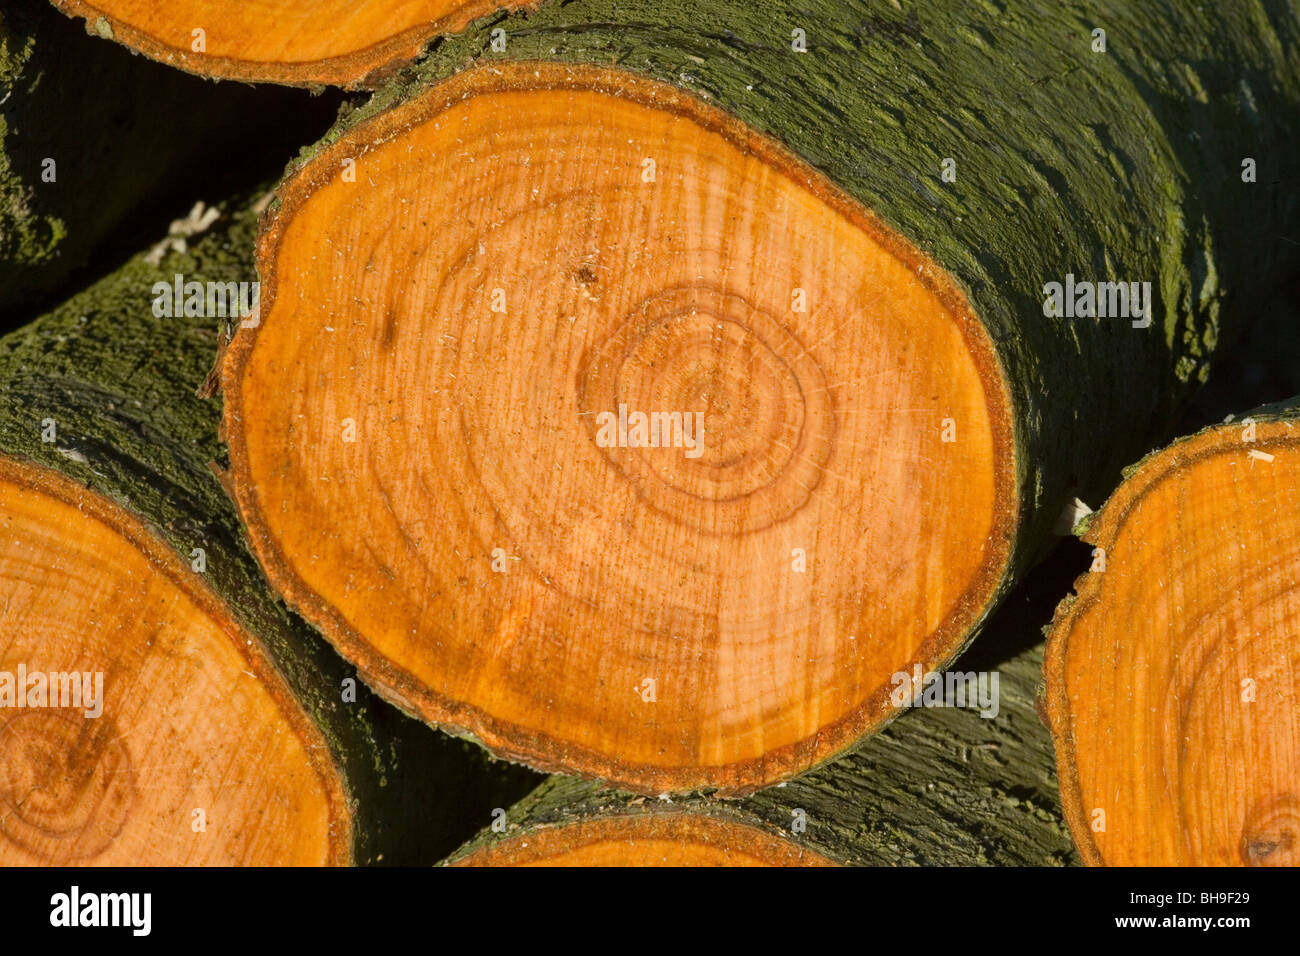 Alder (Alnus glutinosa). Cross section of freshly cut trunk showing annual growth rings. Stock Photo